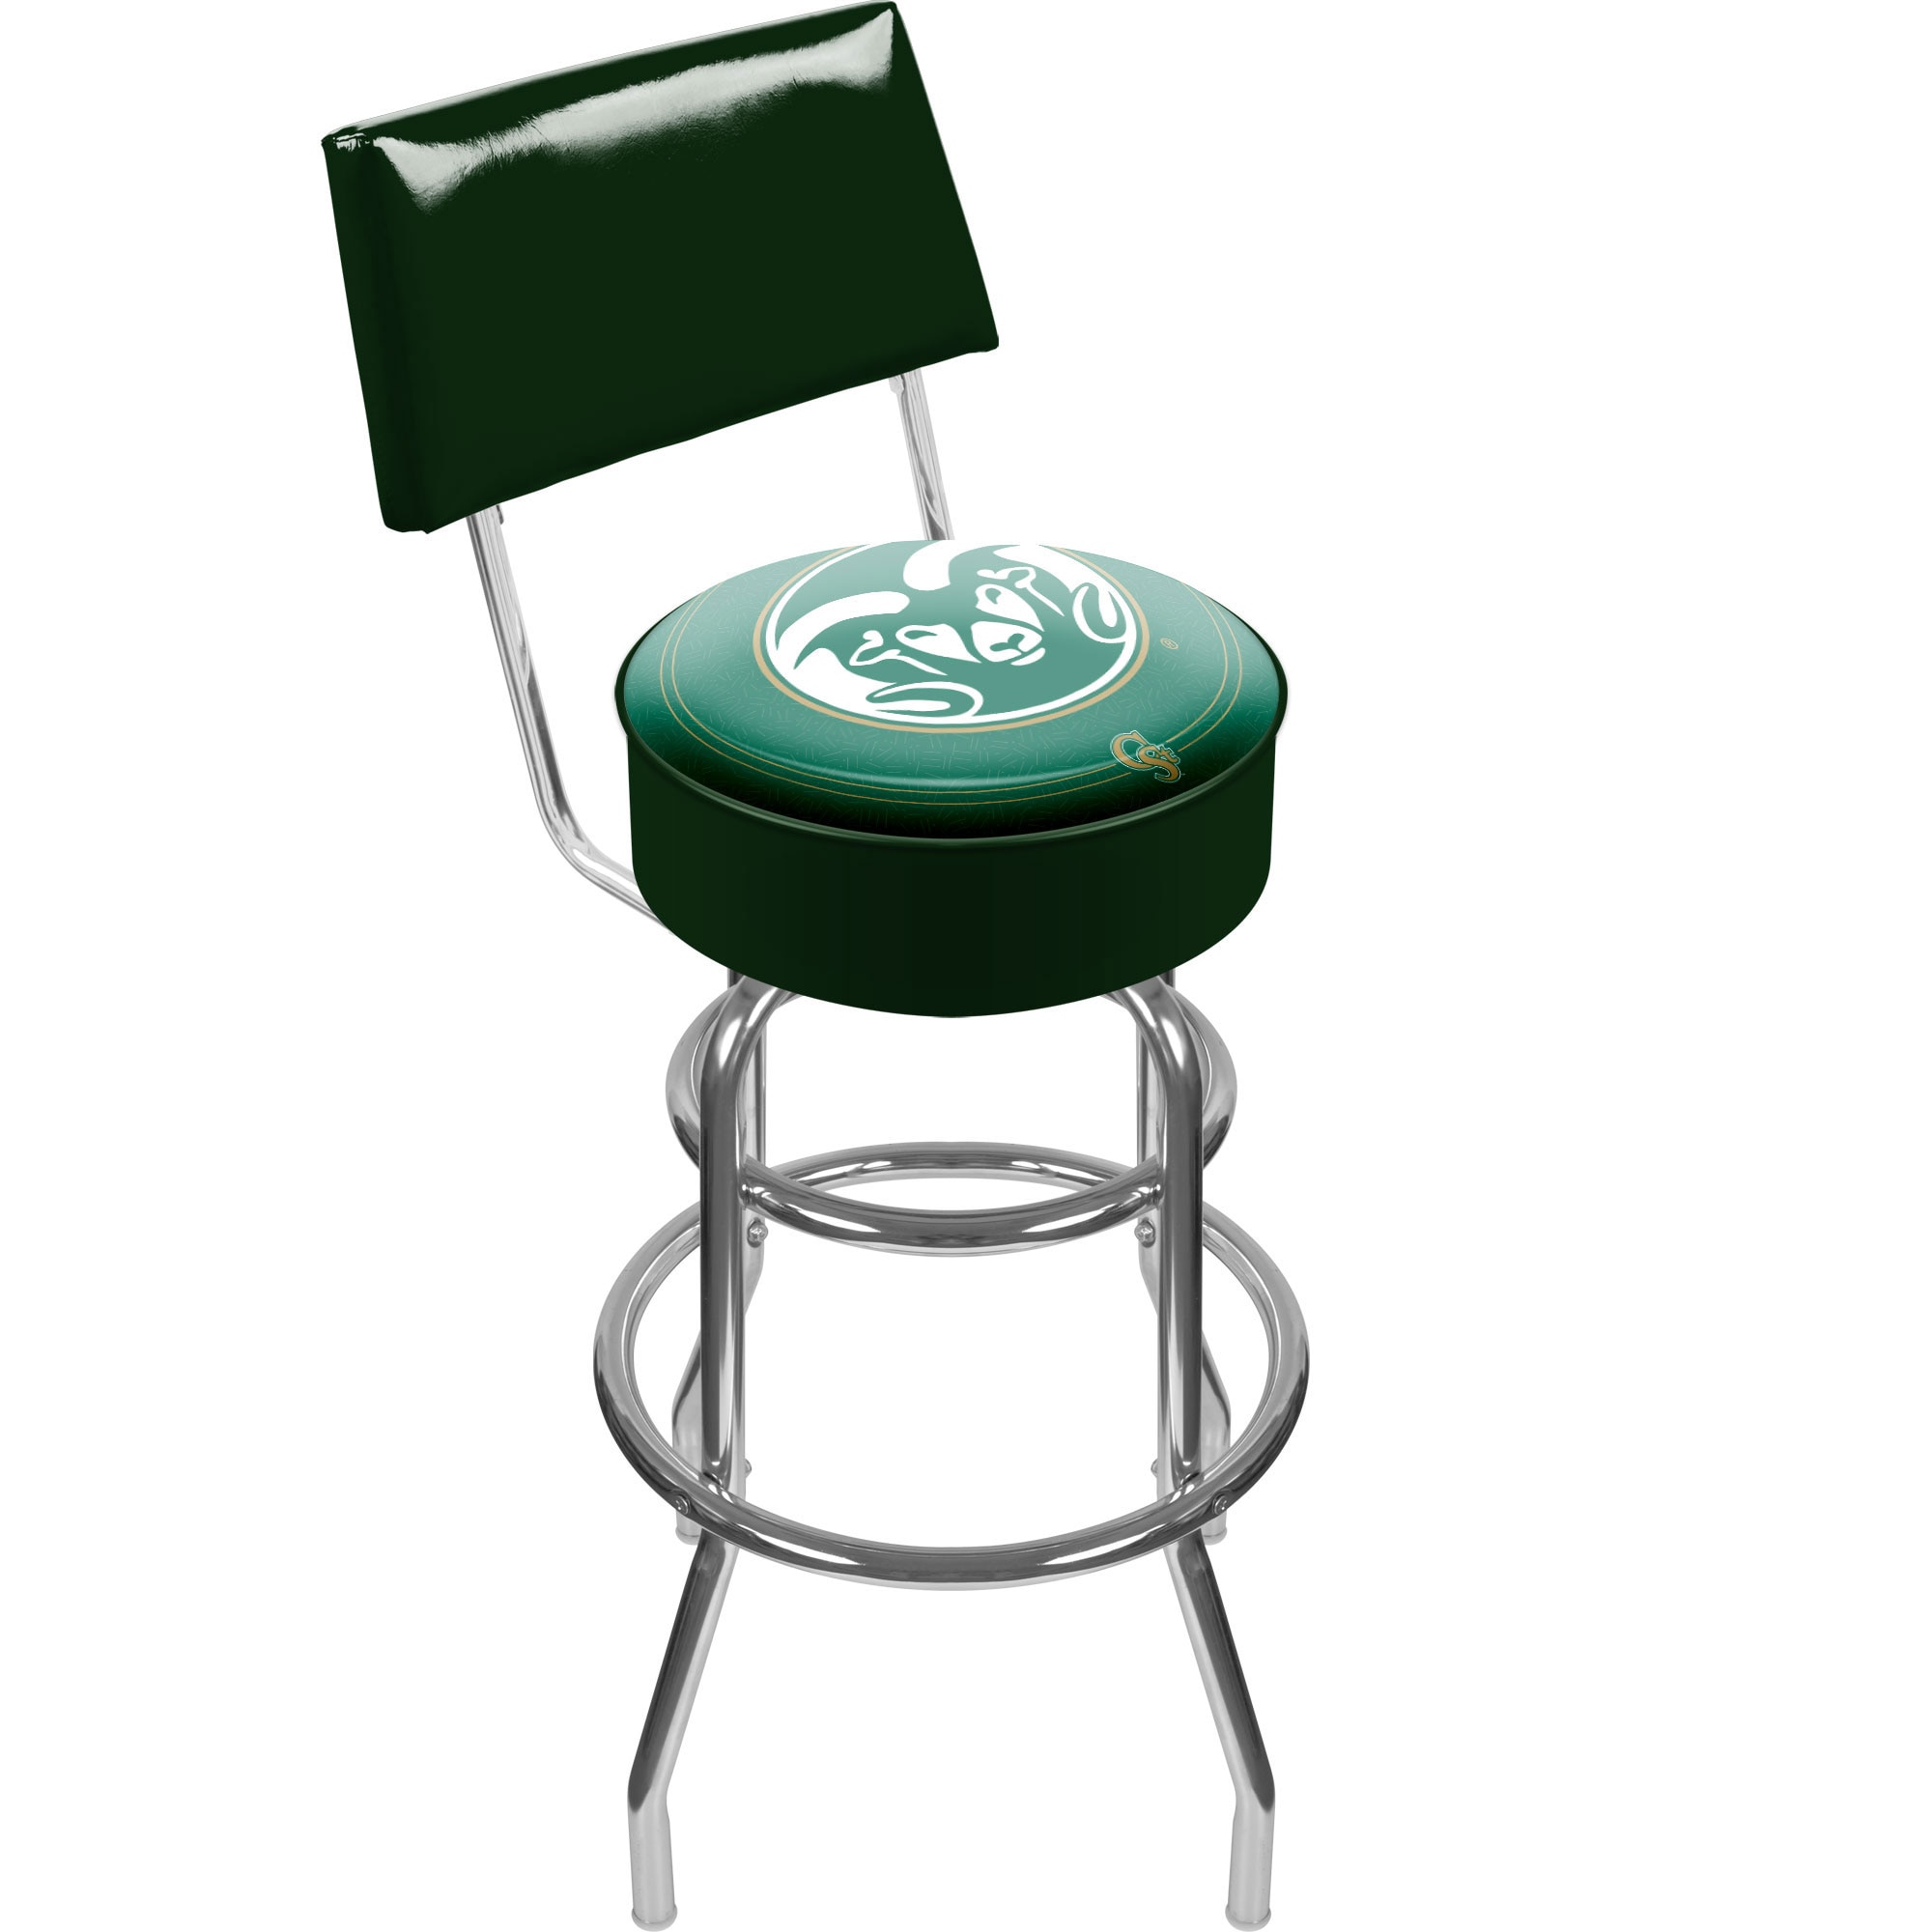 Trademark Gameroom Colorado State Rams Bar Stools with Backs Chrome Bar height (27-in to 35-in) Swivel Bar Stool | CLC1100-COST